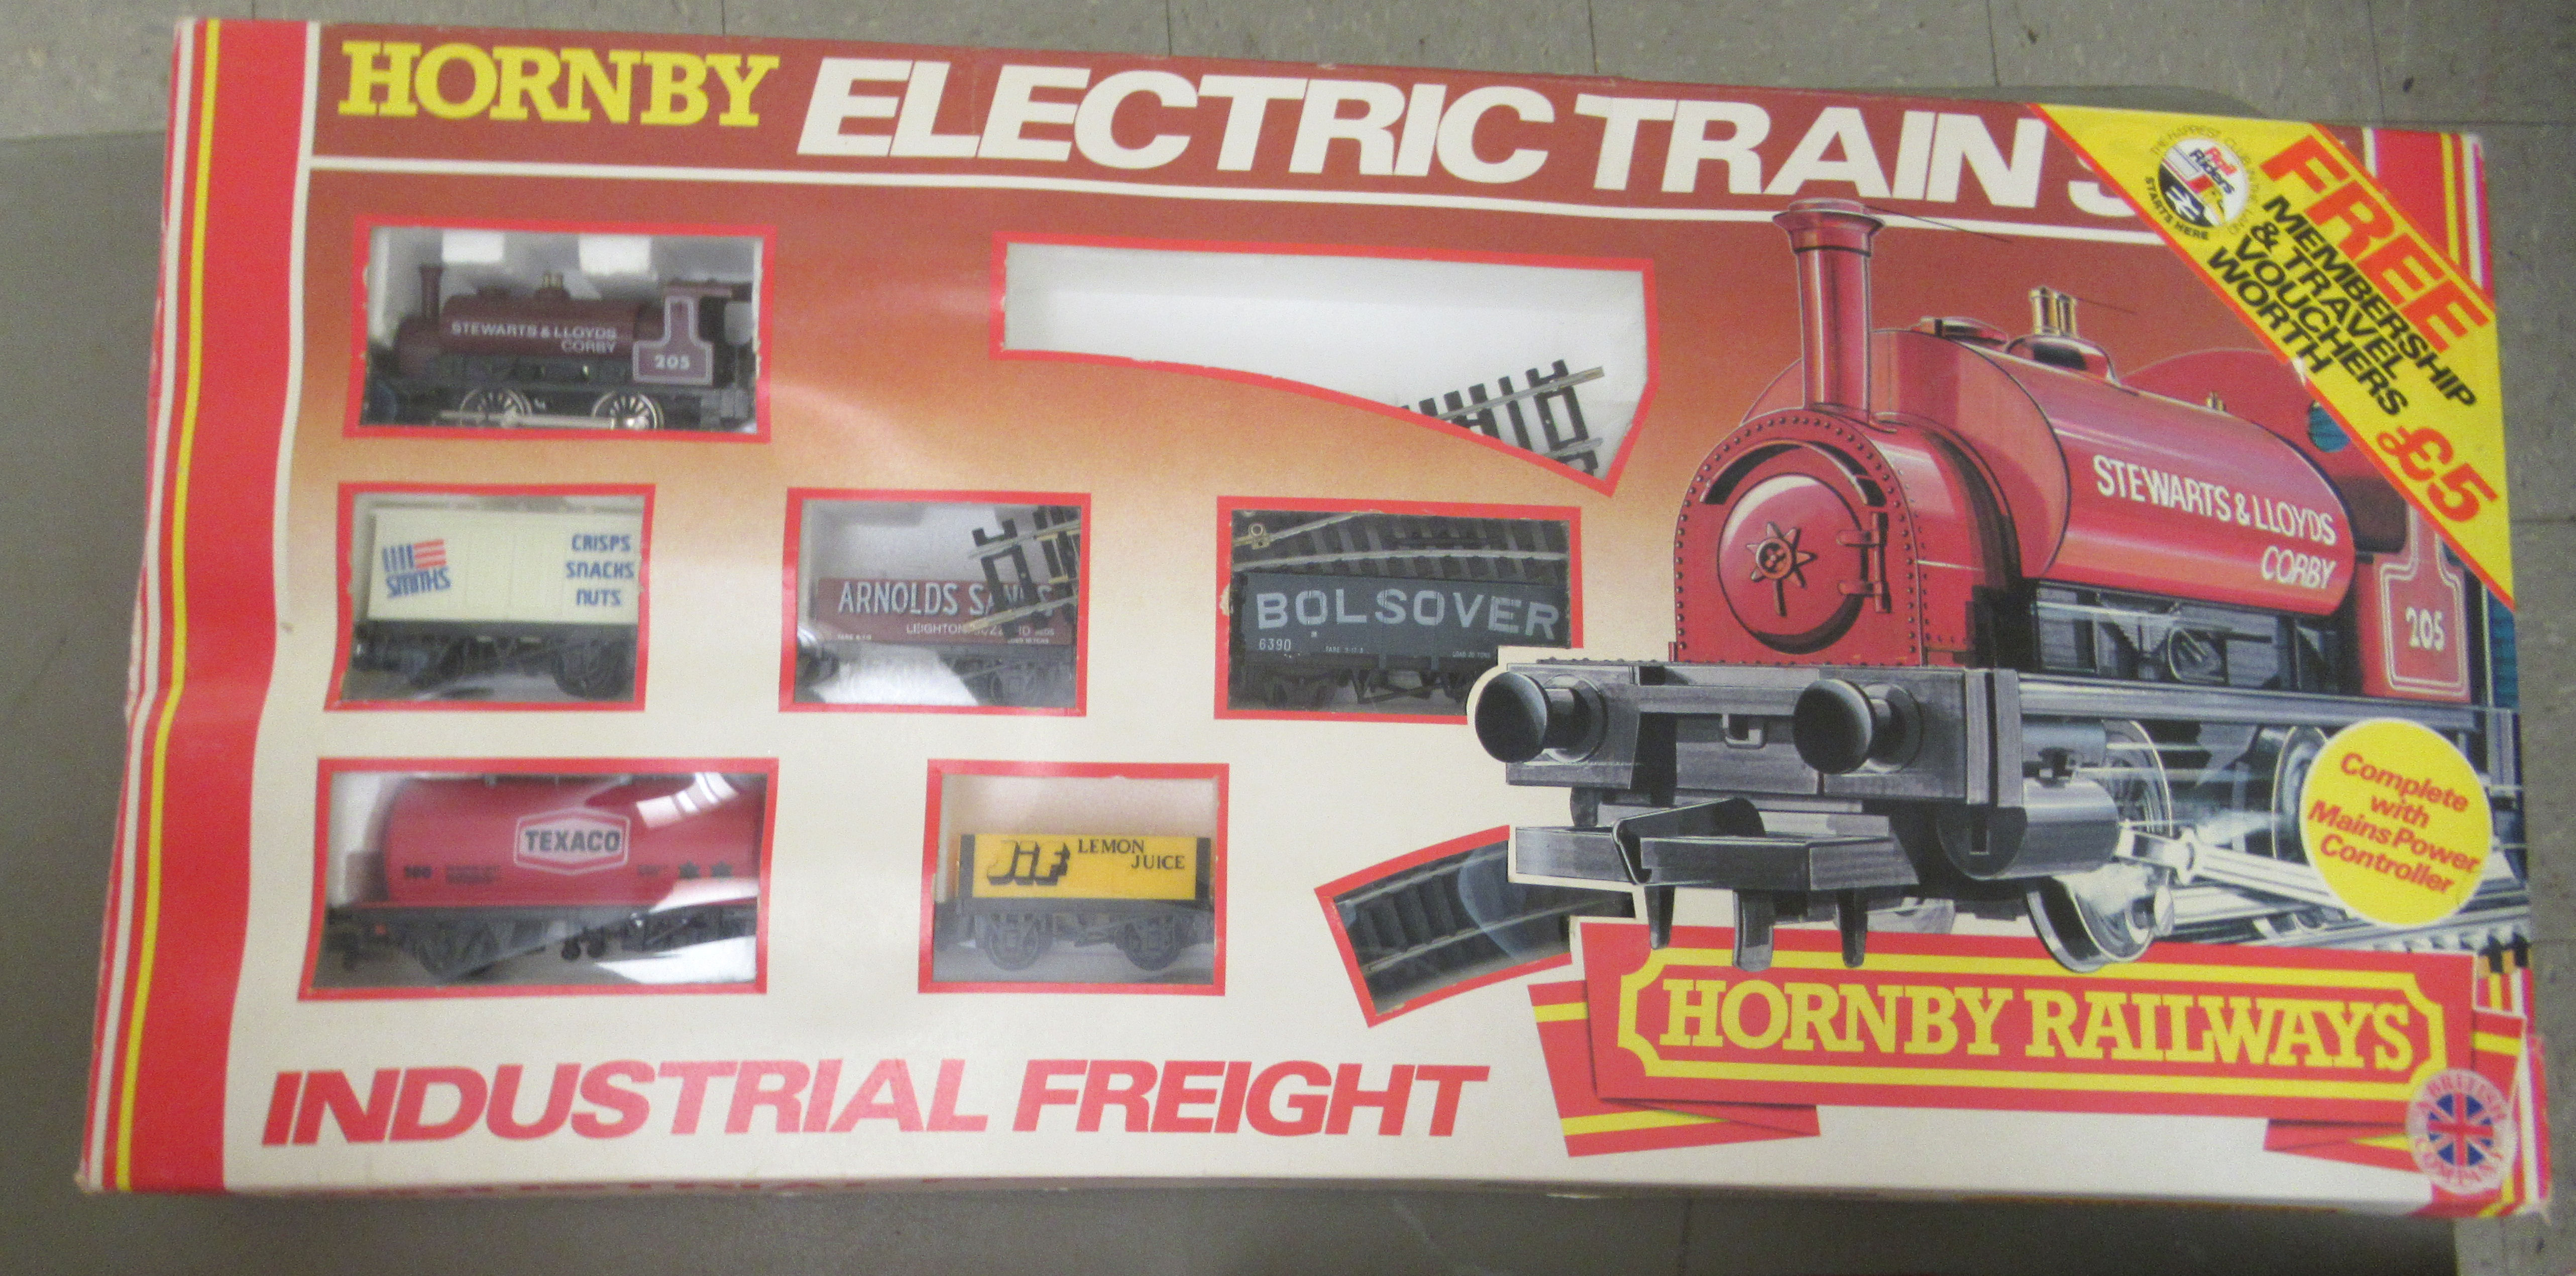 A Hornby railways high speed inter-city train pack; an Industrial freight electric train set, - Image 6 of 6